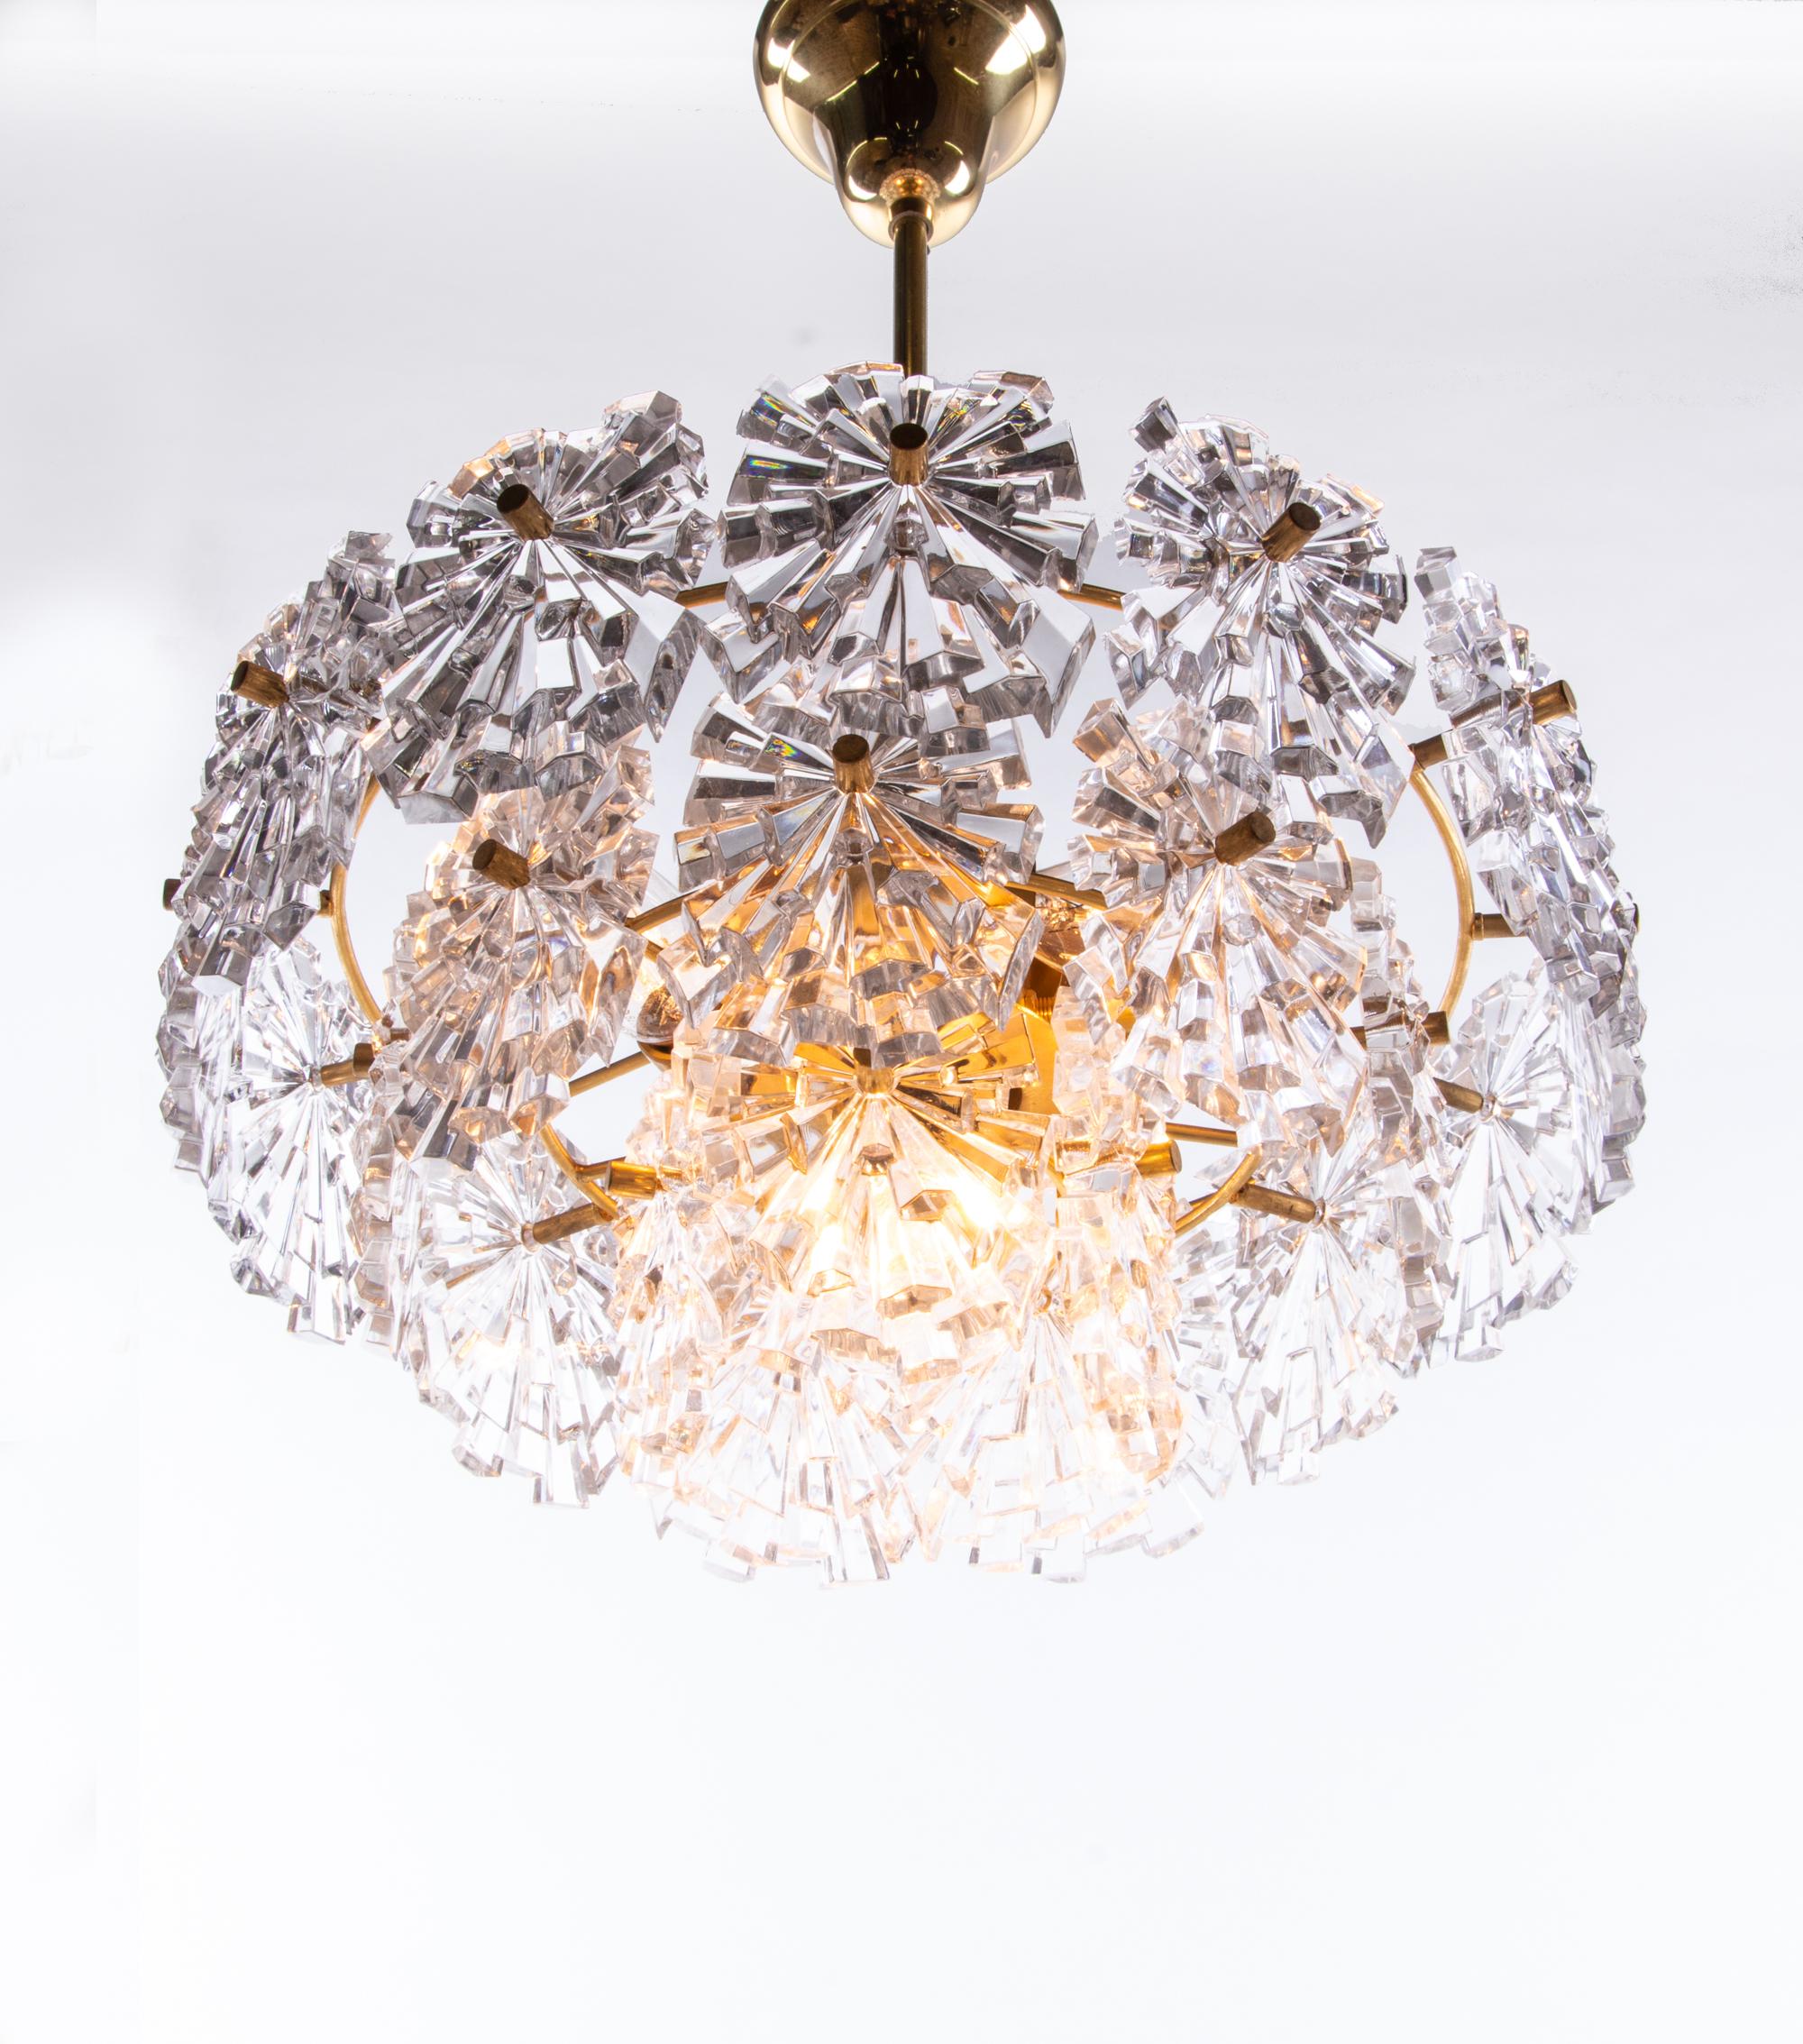 Elegant starburst crystal glass chandelier with faceted crystals mounted on gold-plated brass frame. Star-shaped crystal glass resembles flowers. With this light you make a clear statement in your interior design. A real eyecatcher even unlit.